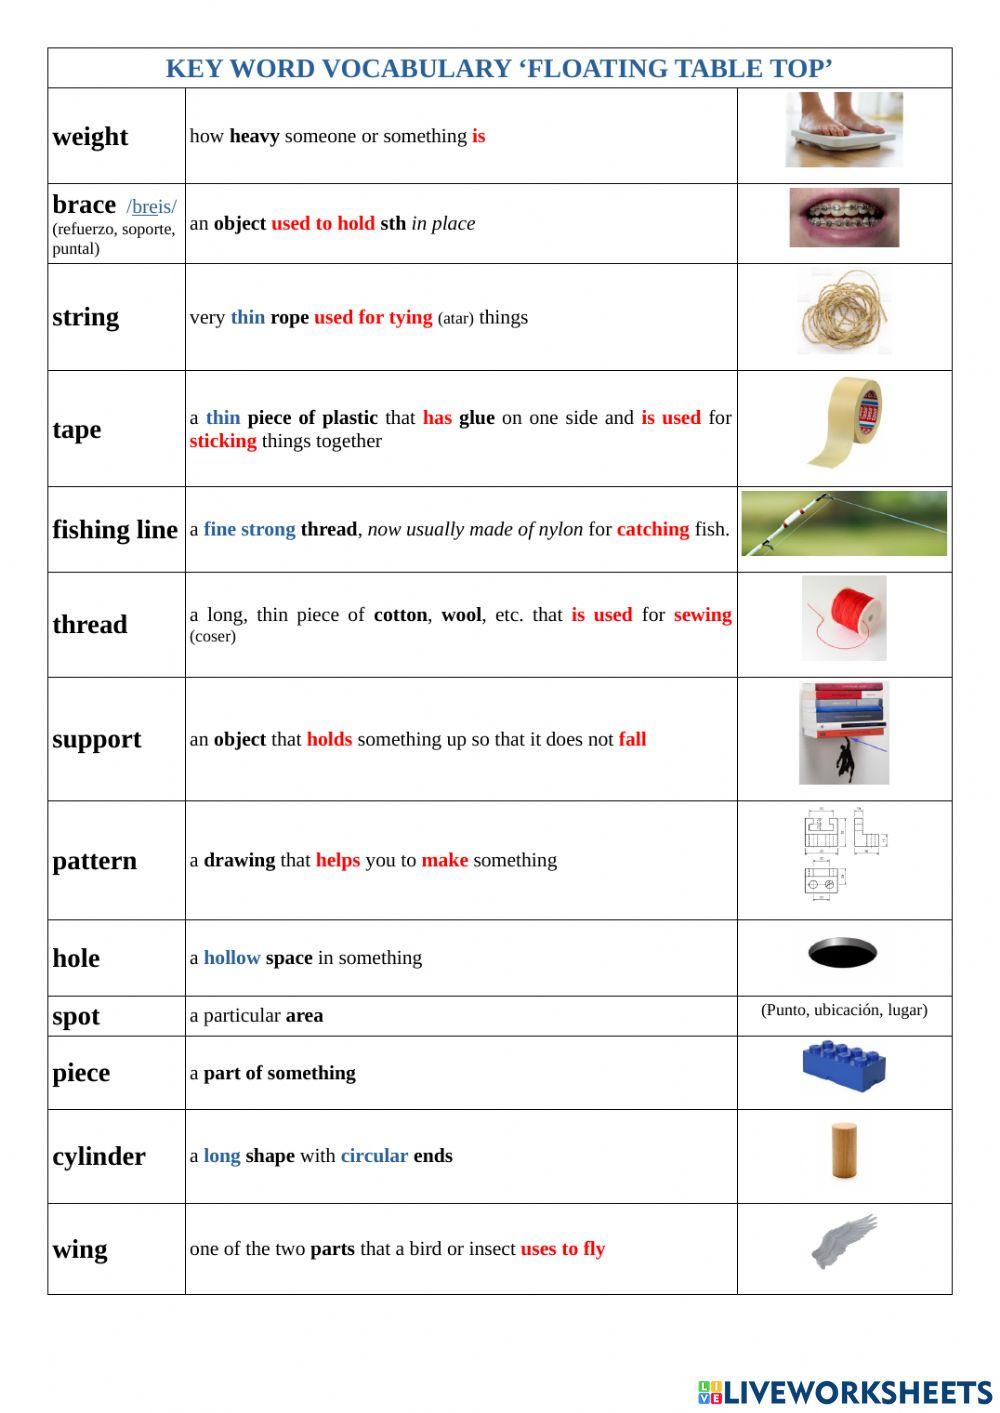 Key word vocabulary ‘floating table top’